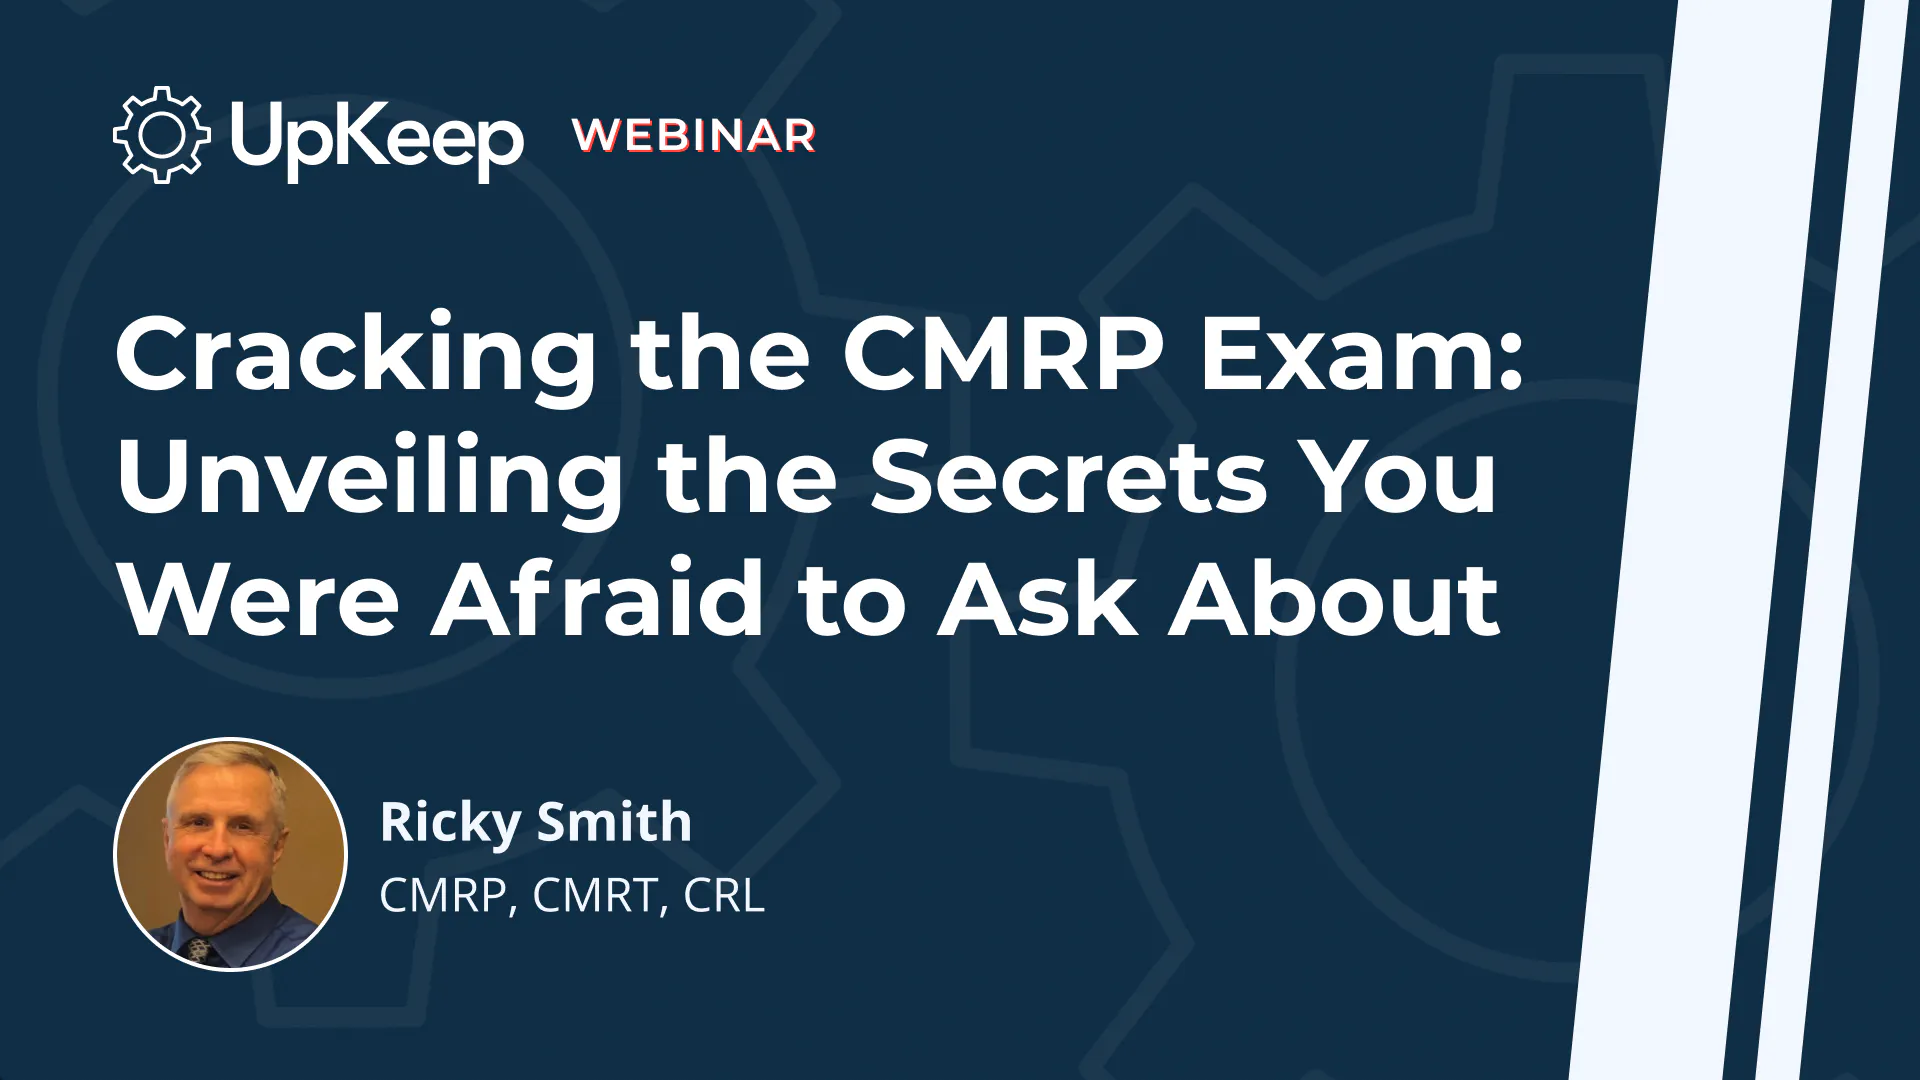 Cracking the CMRP Exam: Unveiling the Secrets You Were Afraid to Ask About